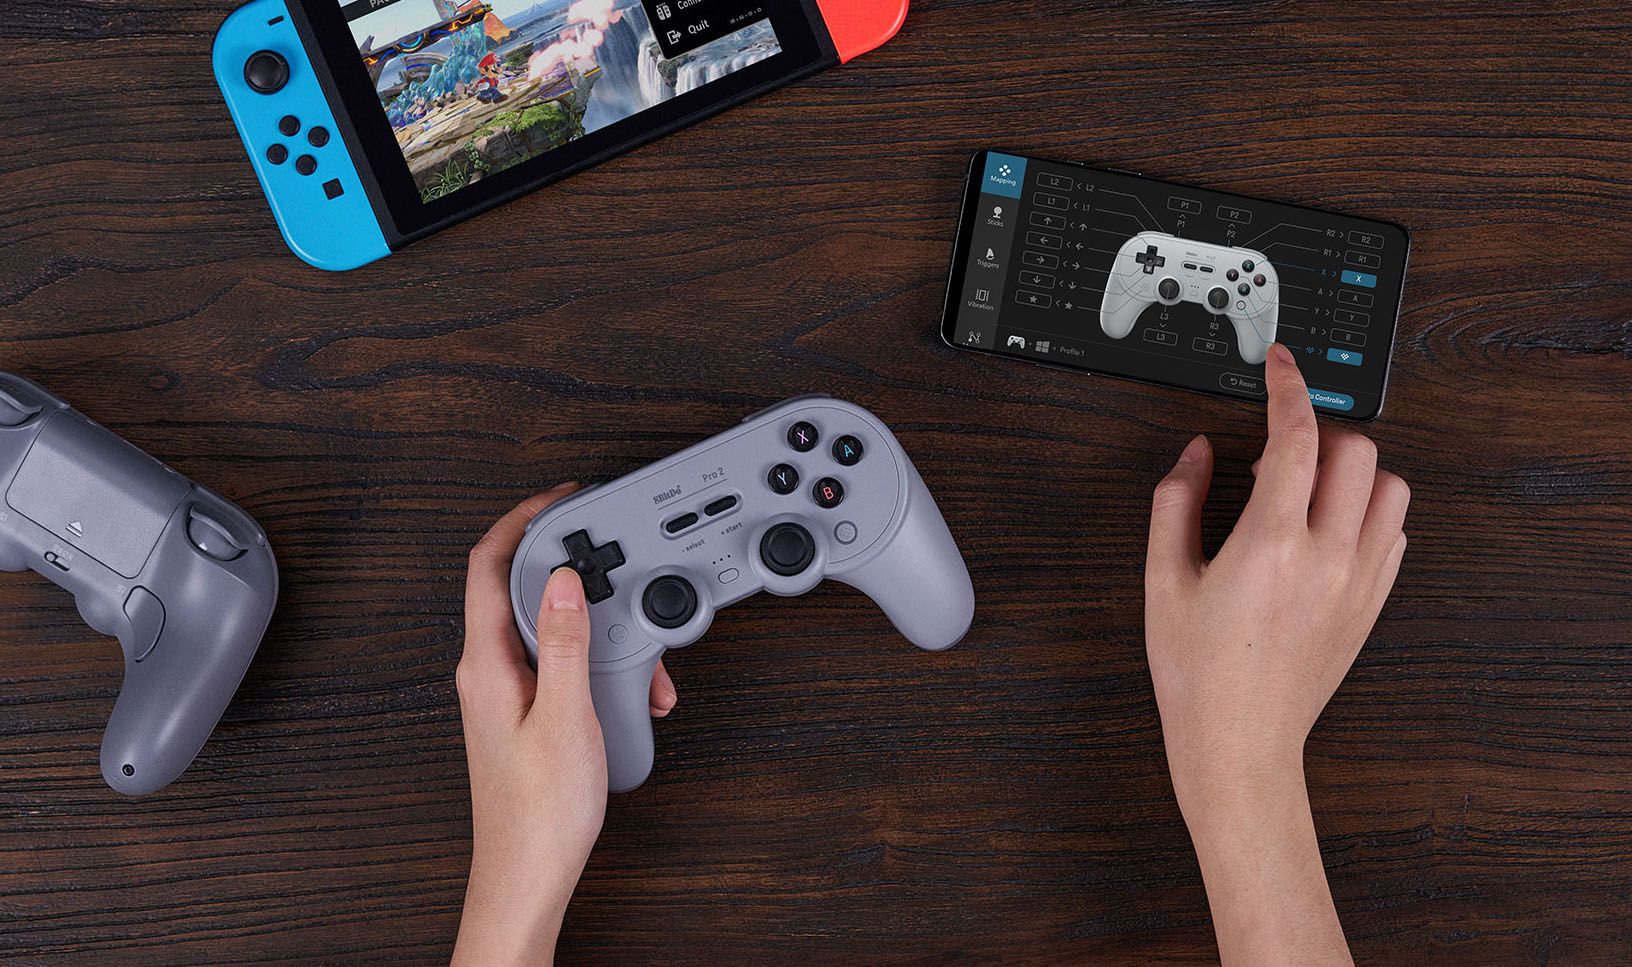 8bitdo S New Pro Controller Lets You Remap Its Buttons From Your Phone